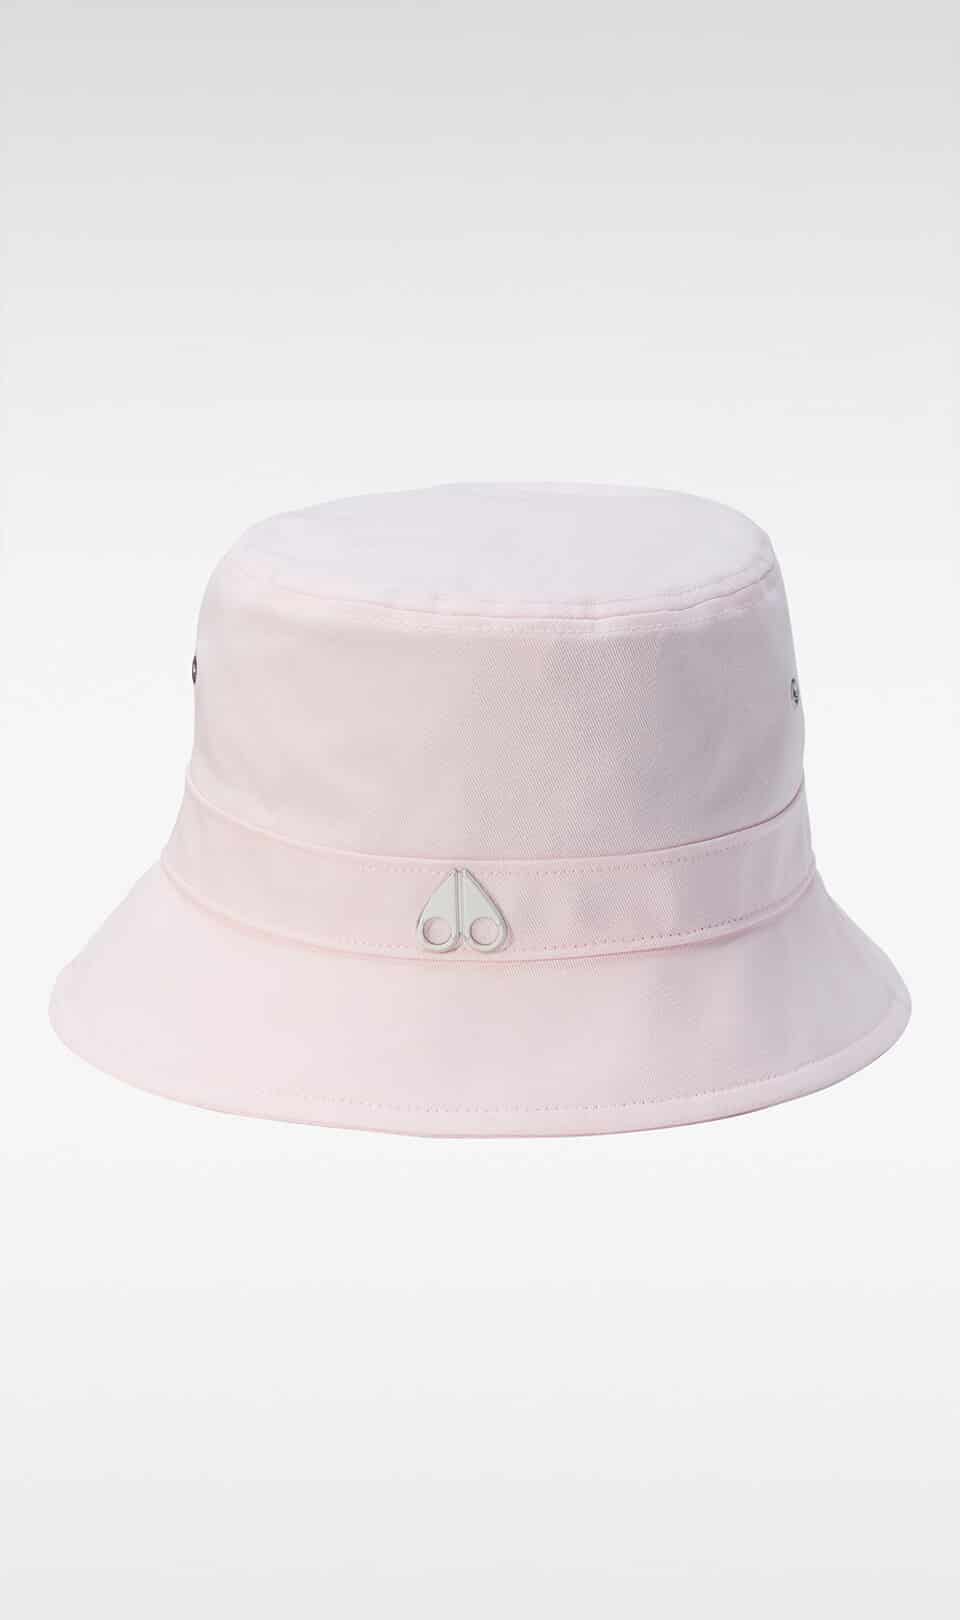 INSERT Moose Knuckles Spring Summer 2022 New Collection Sugar Beach Bucket Hat Rosewater